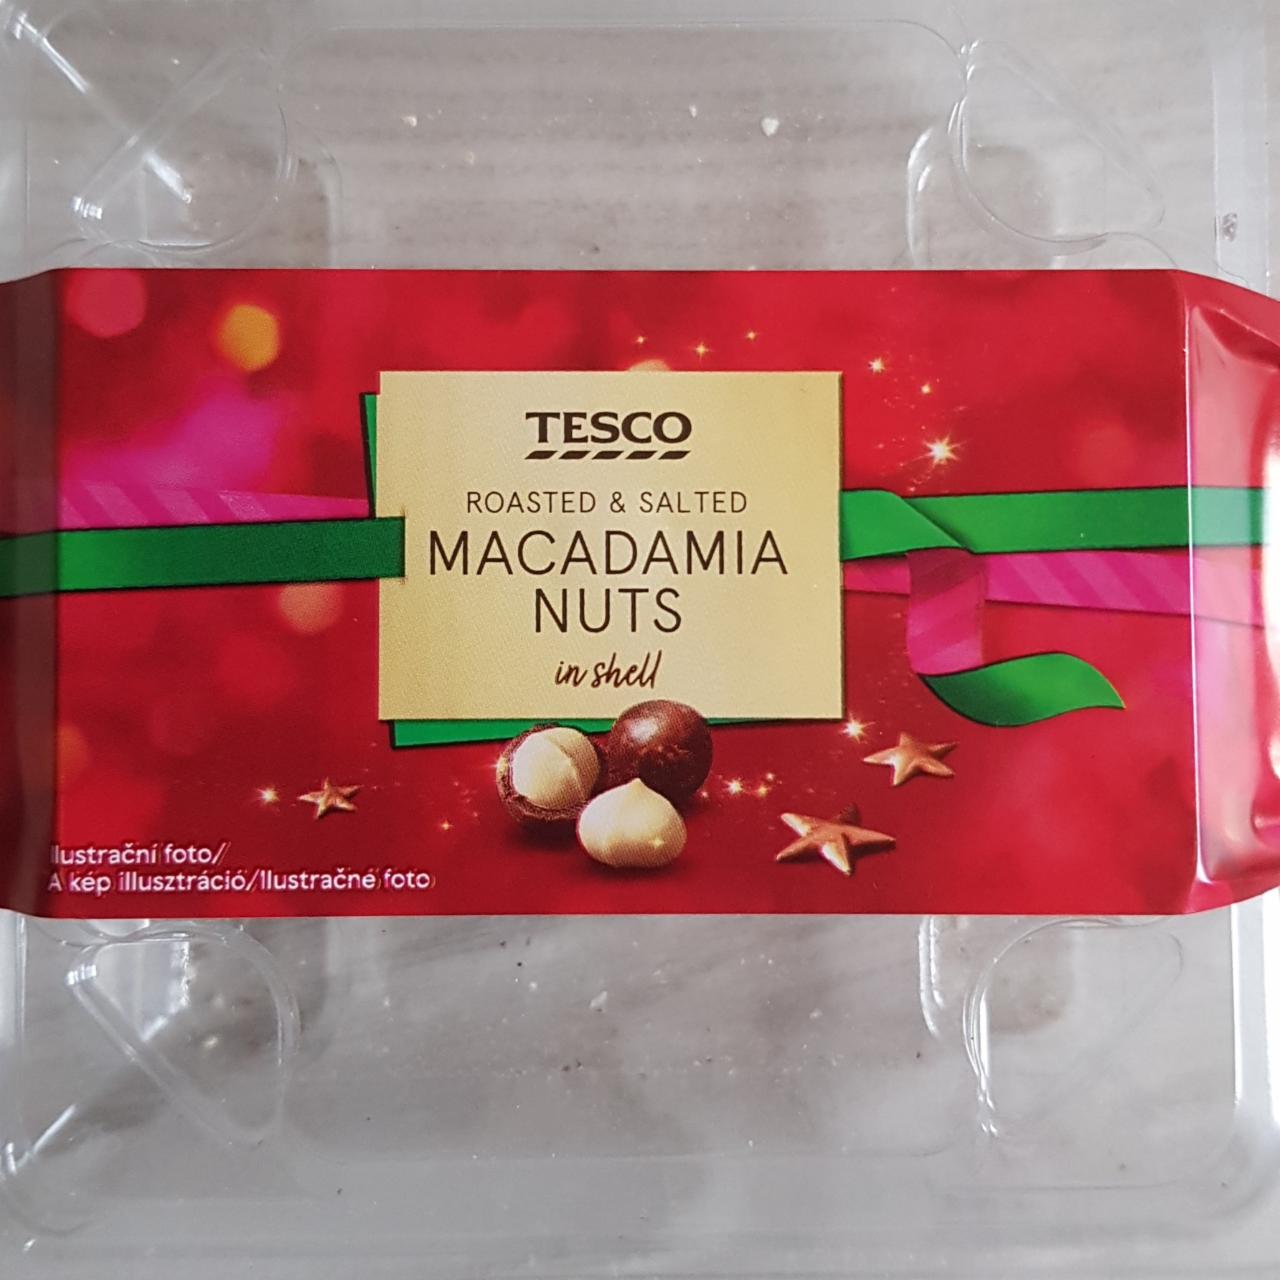 Fotografie - Roasted & Salted Macadamia Nuts in shell Tesco